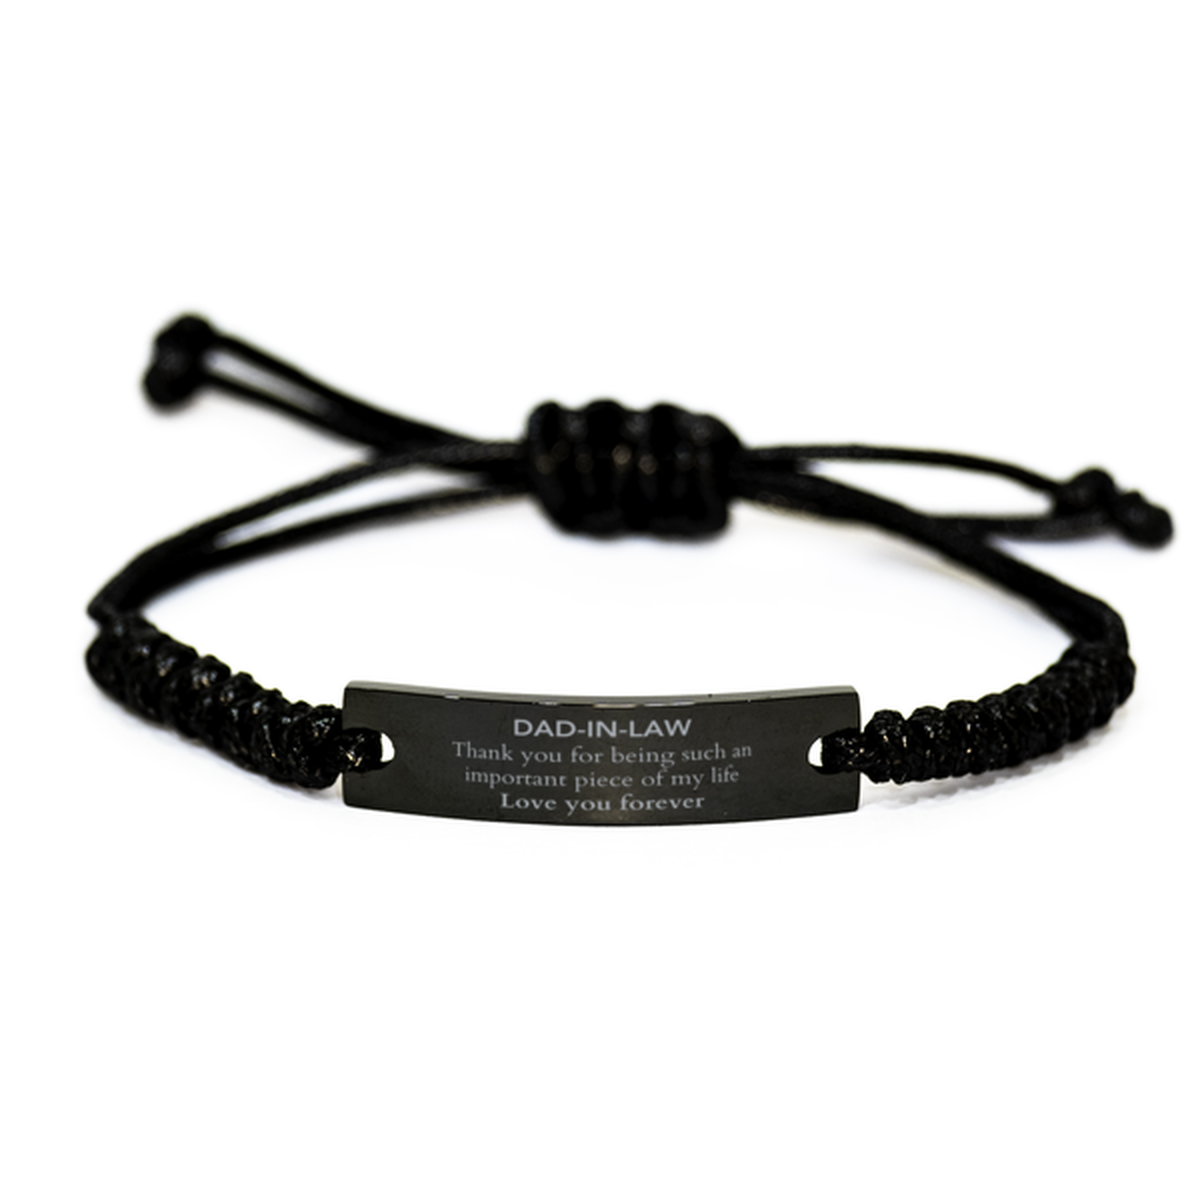 Appropriate Dad-in-law Black Rope Bracelet Epic Birthday Gifts for Dad-in-law Thank you for being such an important piece of my life Dad-in-law Christmas Mothers Fathers Day